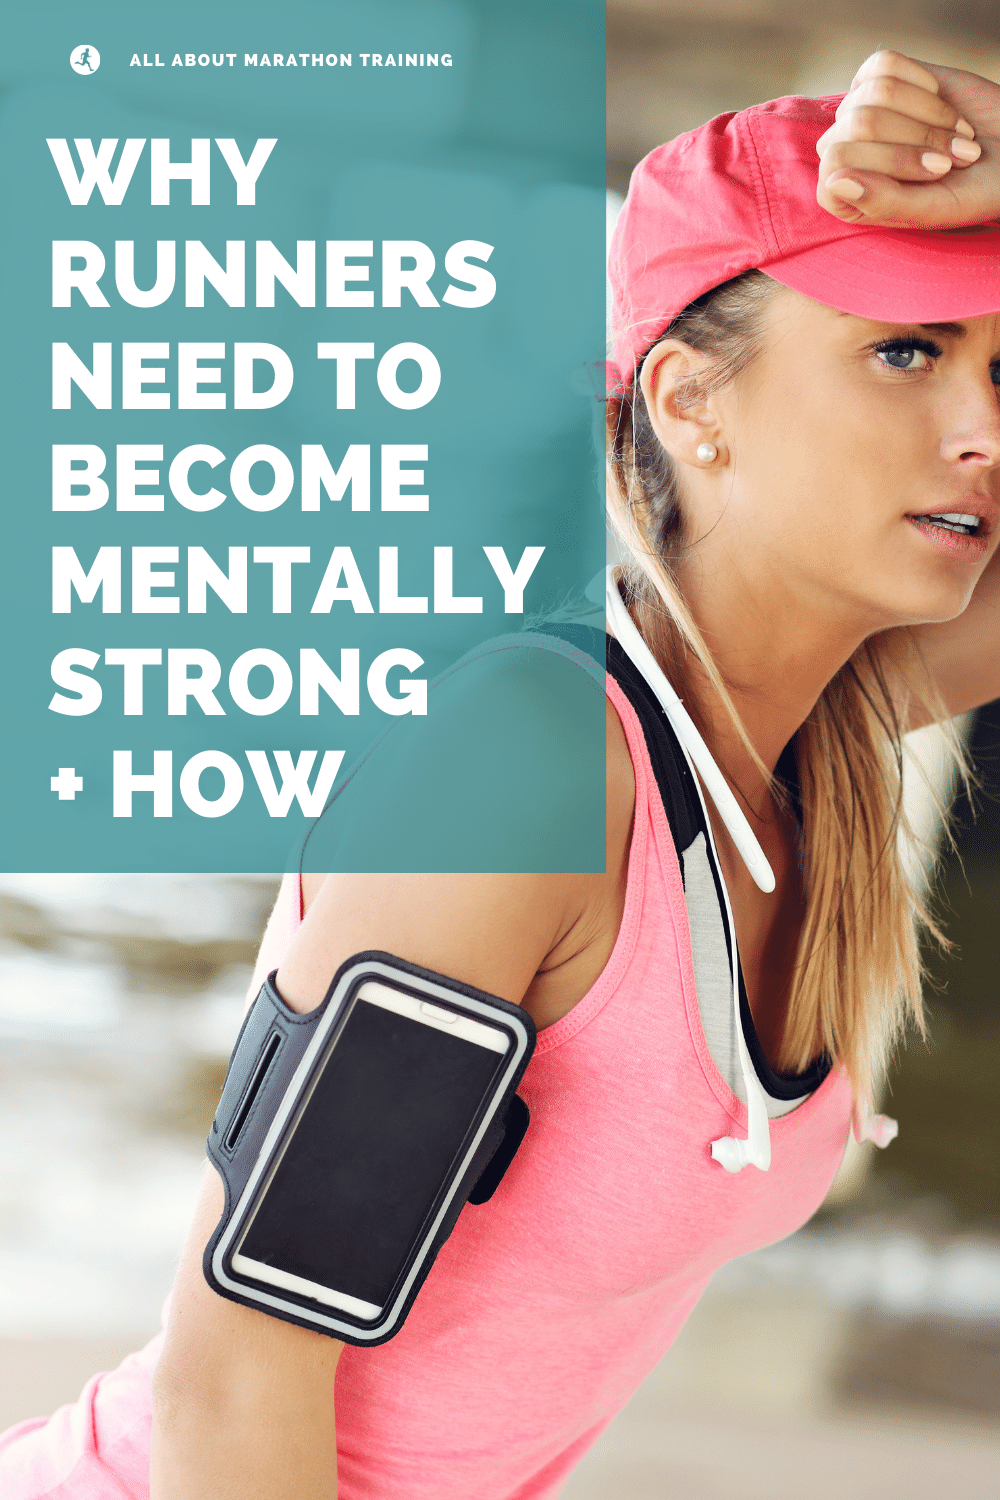 Are Marathon Runners Mentally Strong?